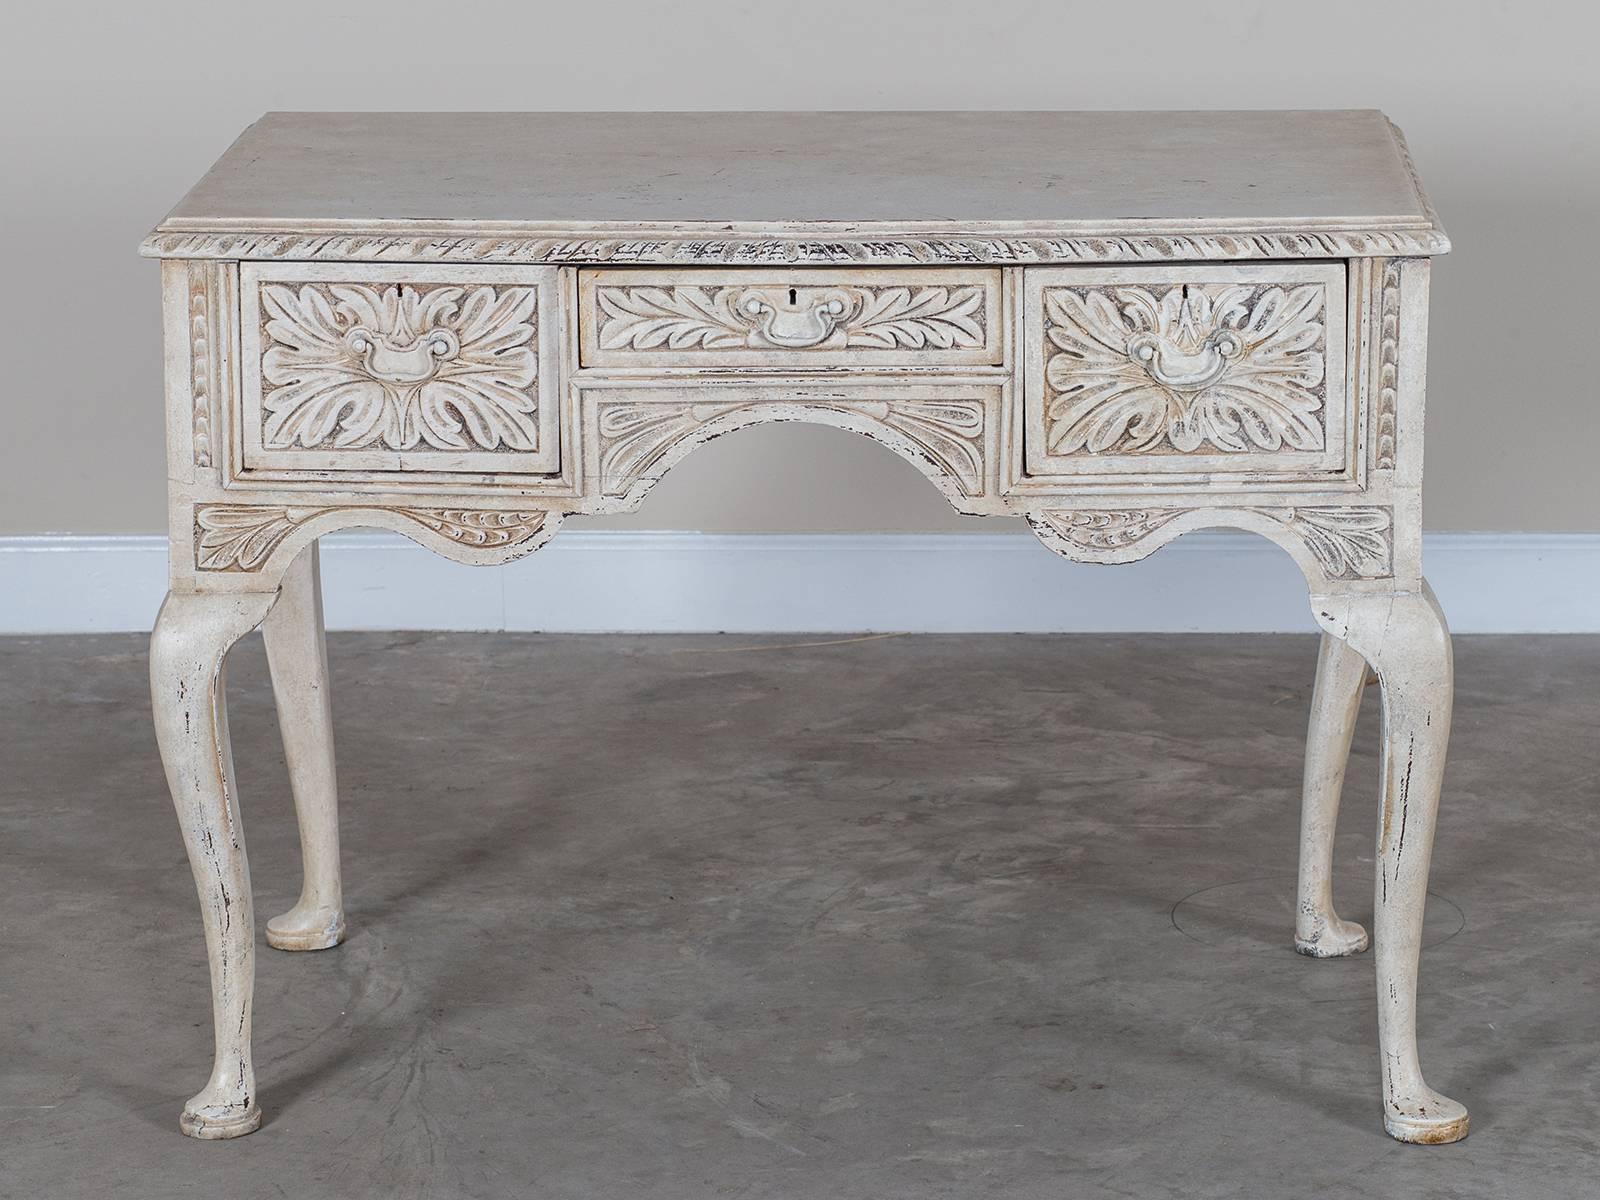 Receive our new selections direct from 1stdibs by email each week. Please click Follow Dealer below and see them first!

An antique English Queen Anne style painted oak lowboy circa 1850 used as a side table or console. This Classic piece of early